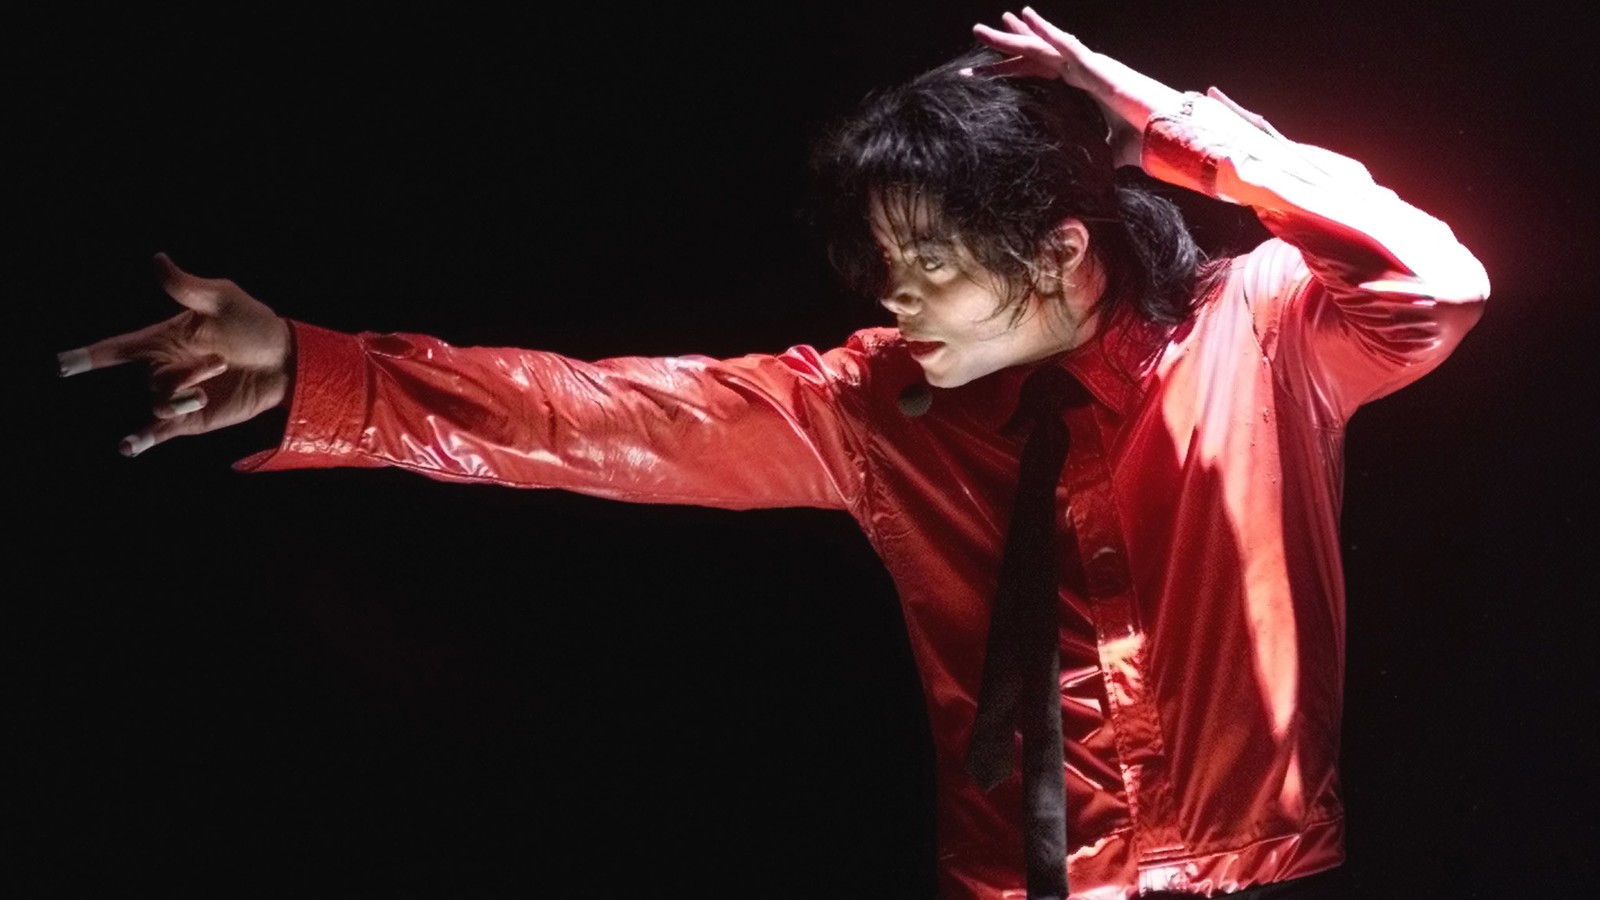 Listening to Michael Jackson After 'Leaving Neverland' - The Atlantic